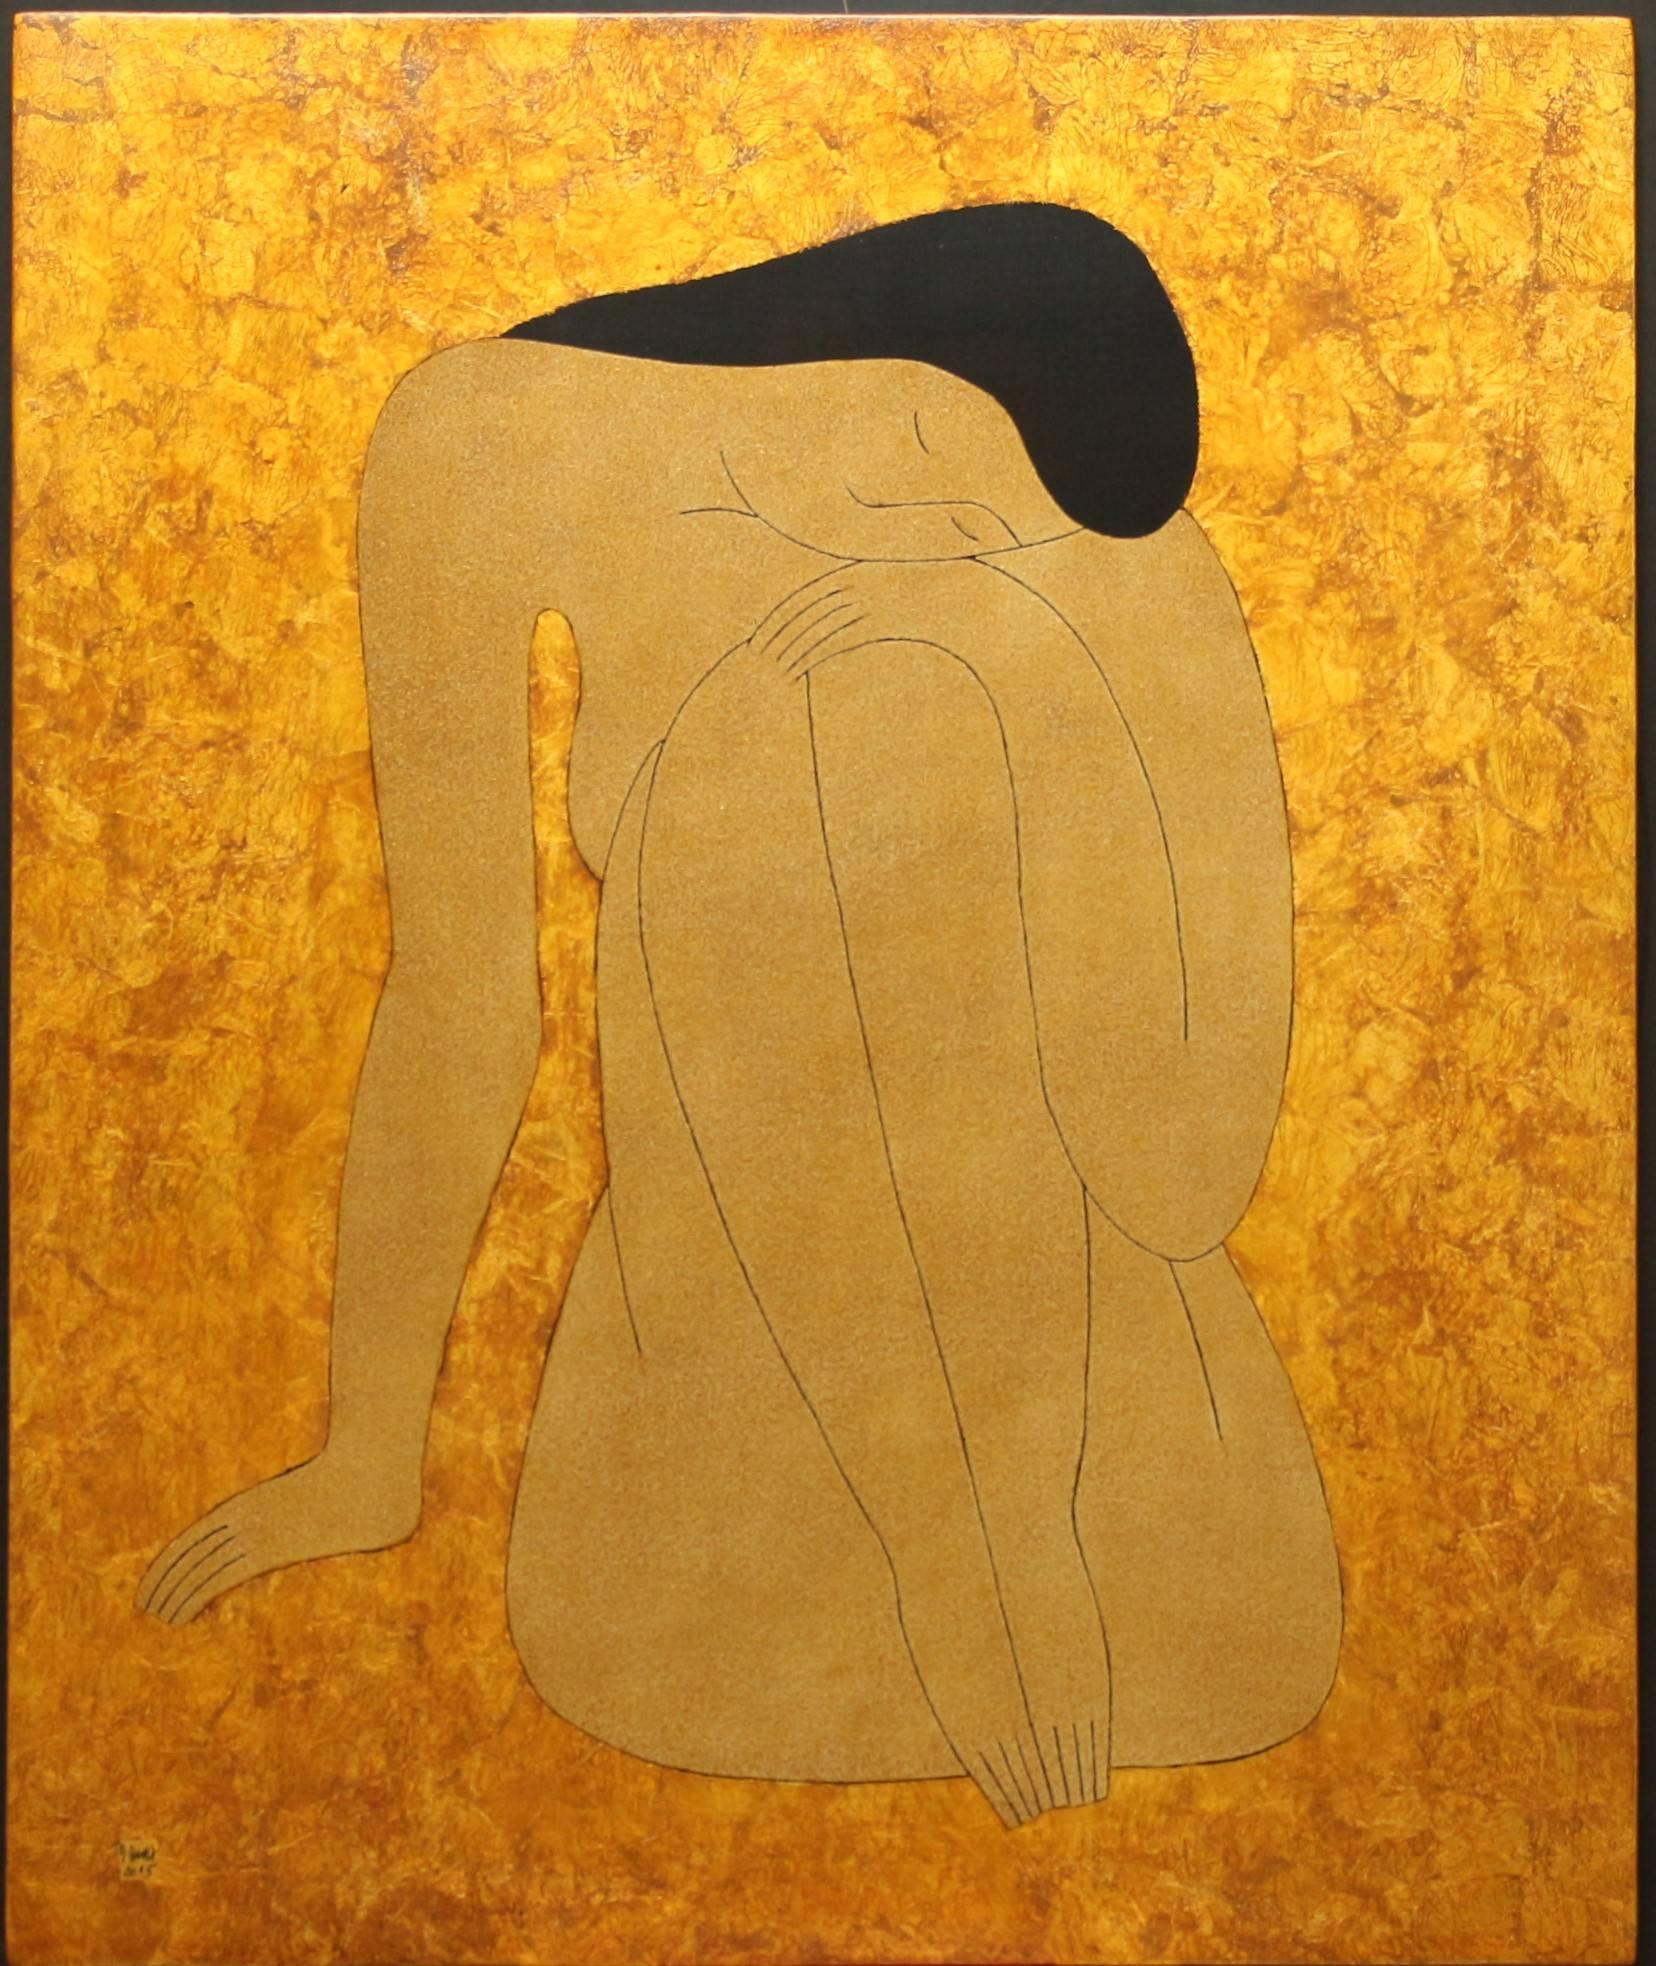 Dinh Hanh Figurative Painting - "Female at Rest" Dinh Hahn Figurative, Female, Lacquer on Wood, Asian, Gold 